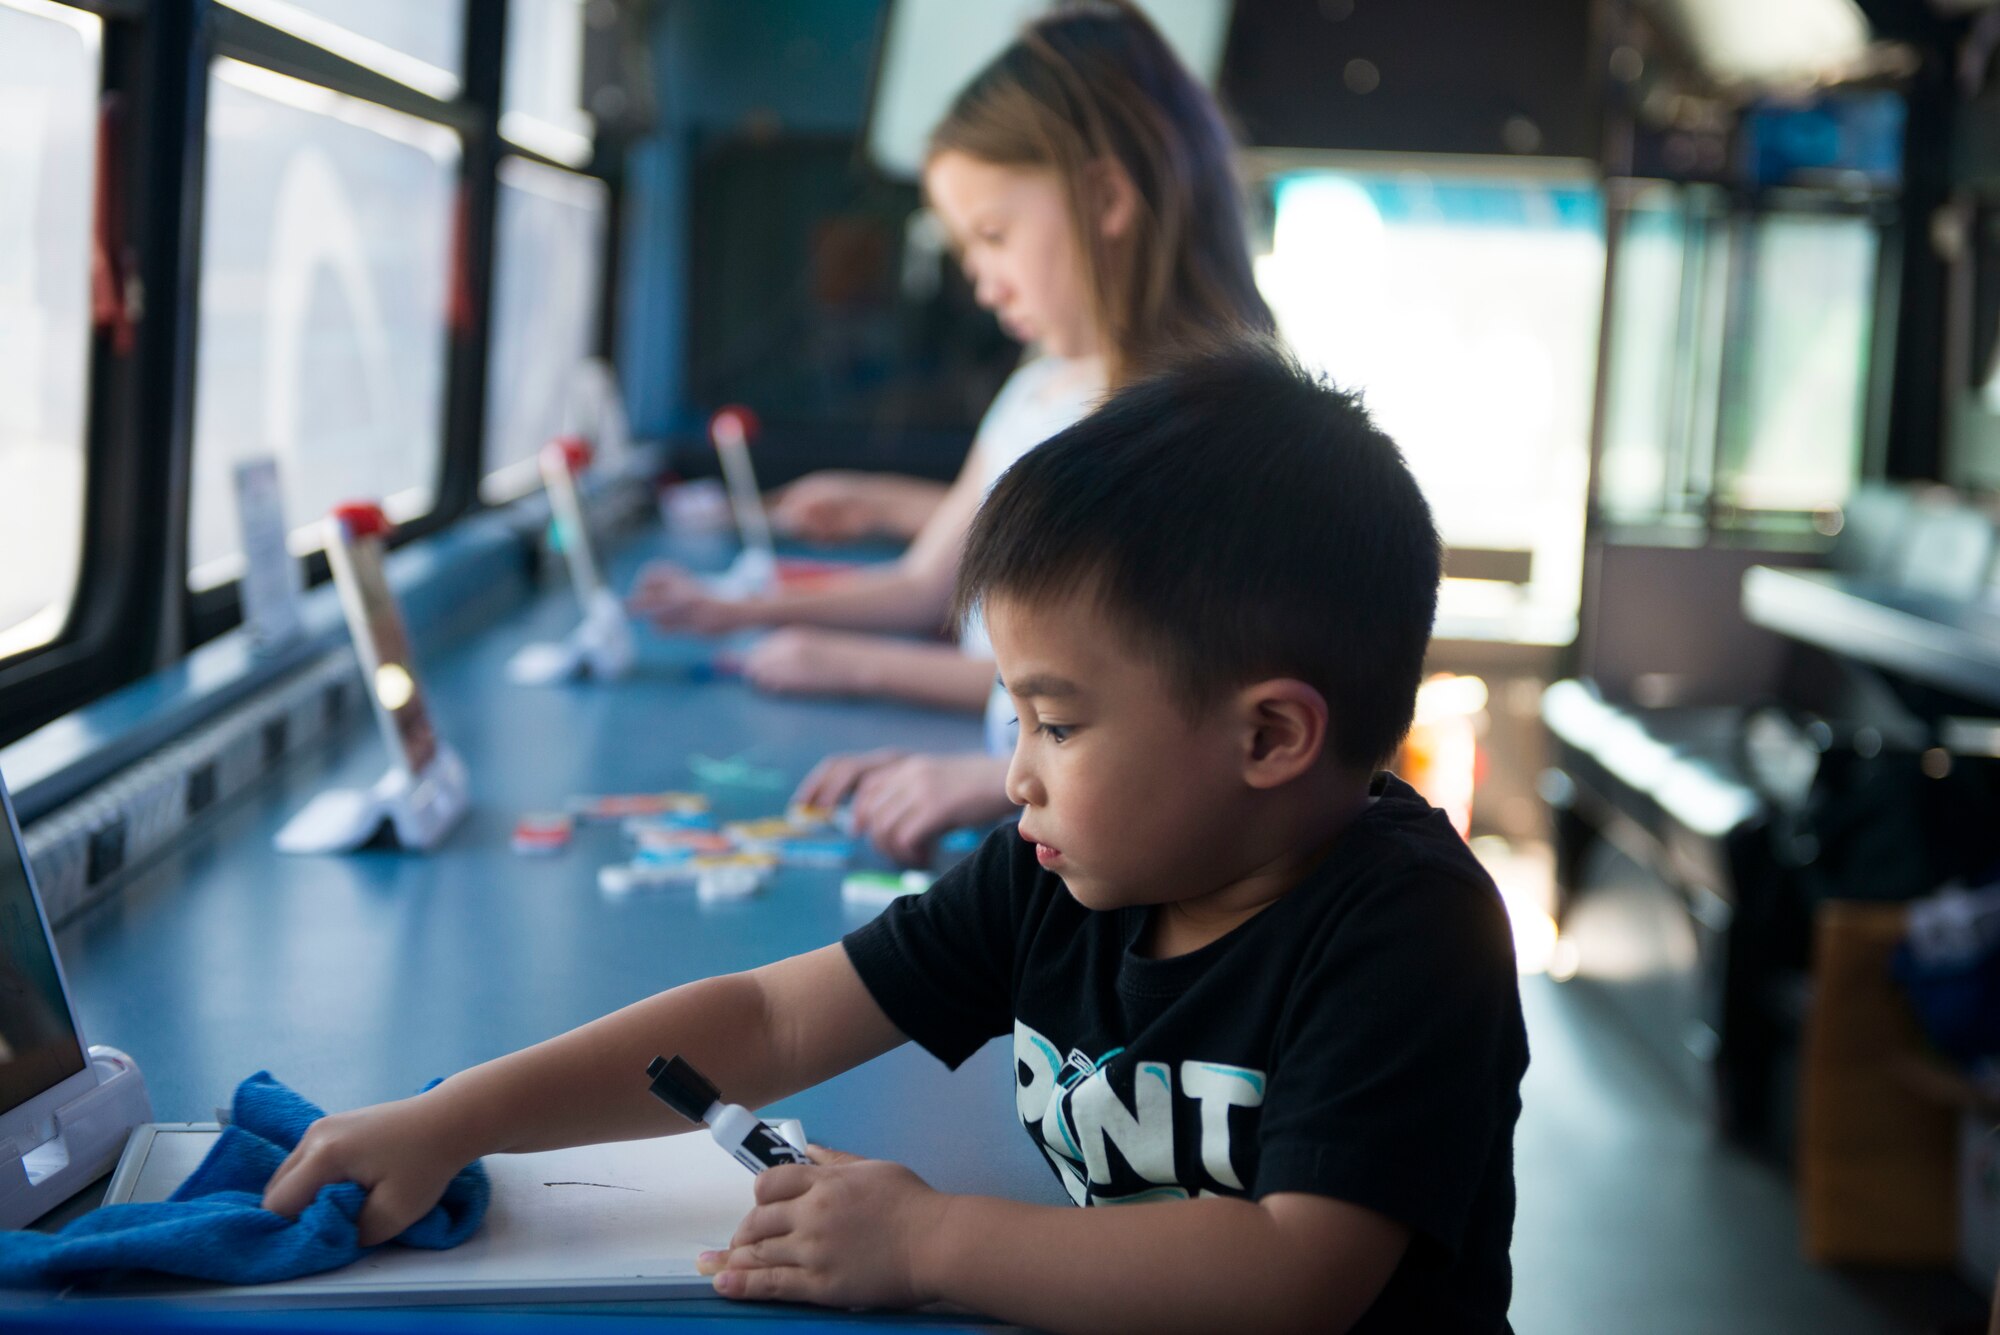 The Youth Center hosted the Micron STEM Bus tour with different stations set up for students to explore different aspects of science, technology, engineering and math.